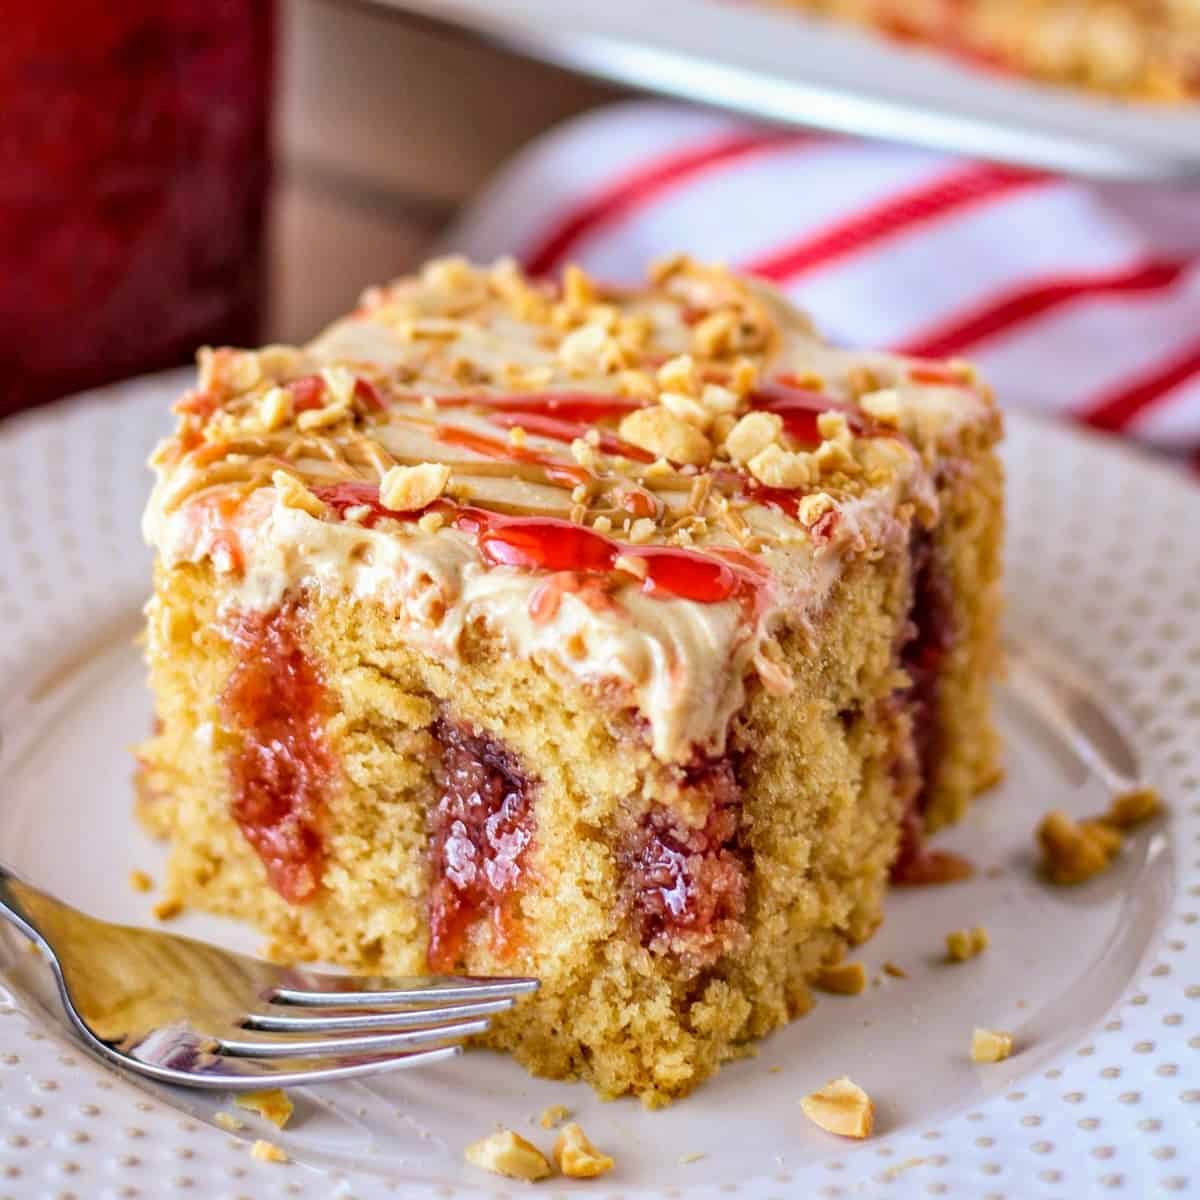 Peanut Butter and Jelly Poke Cake